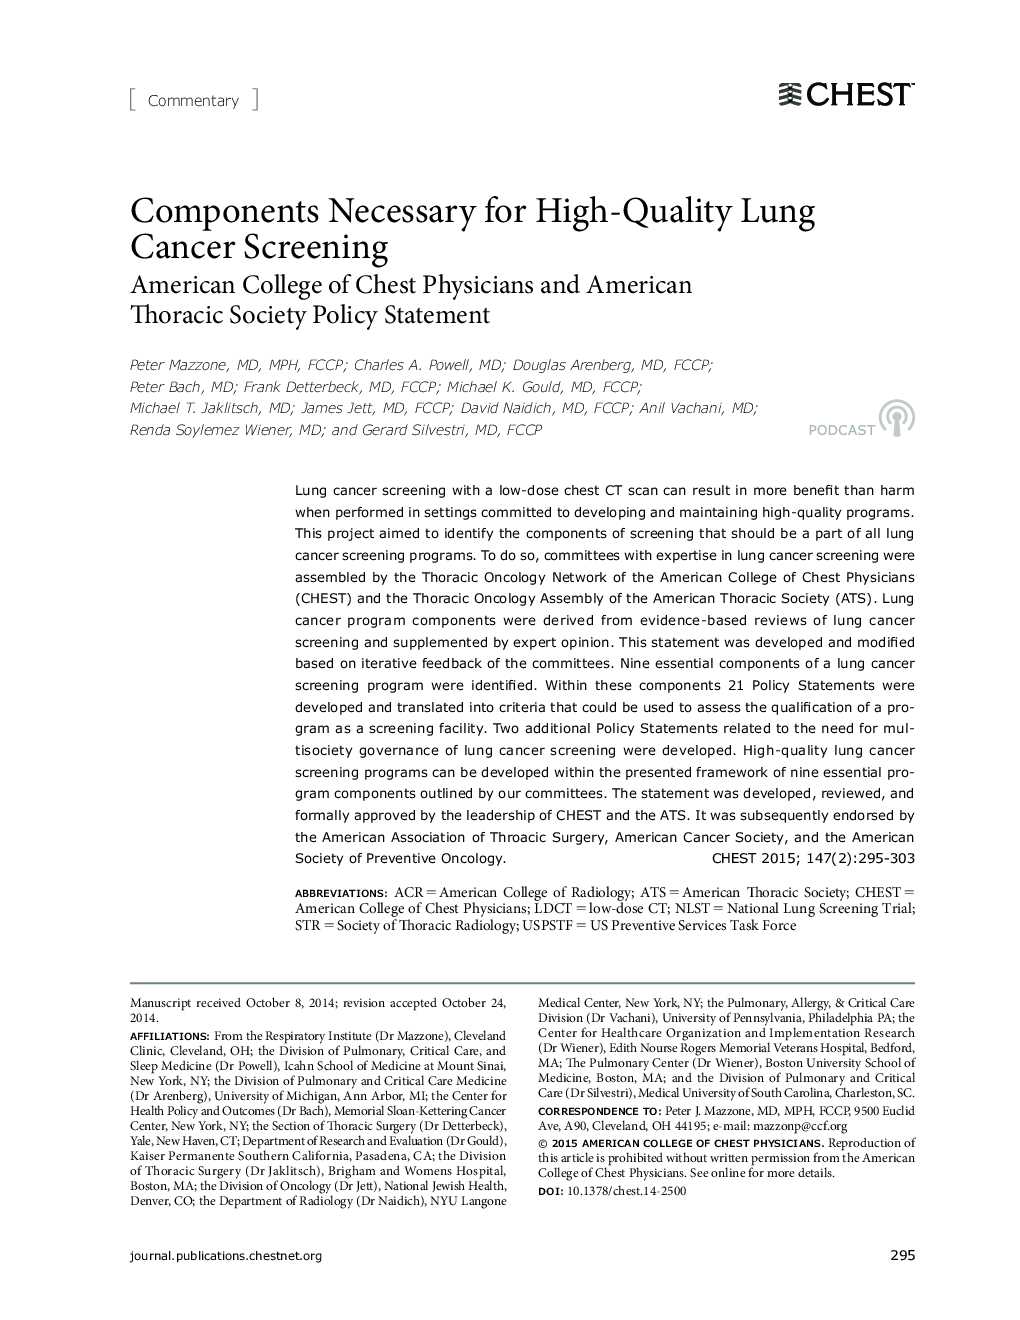 Components Necessary for High-Quality Lung Cancer Screening